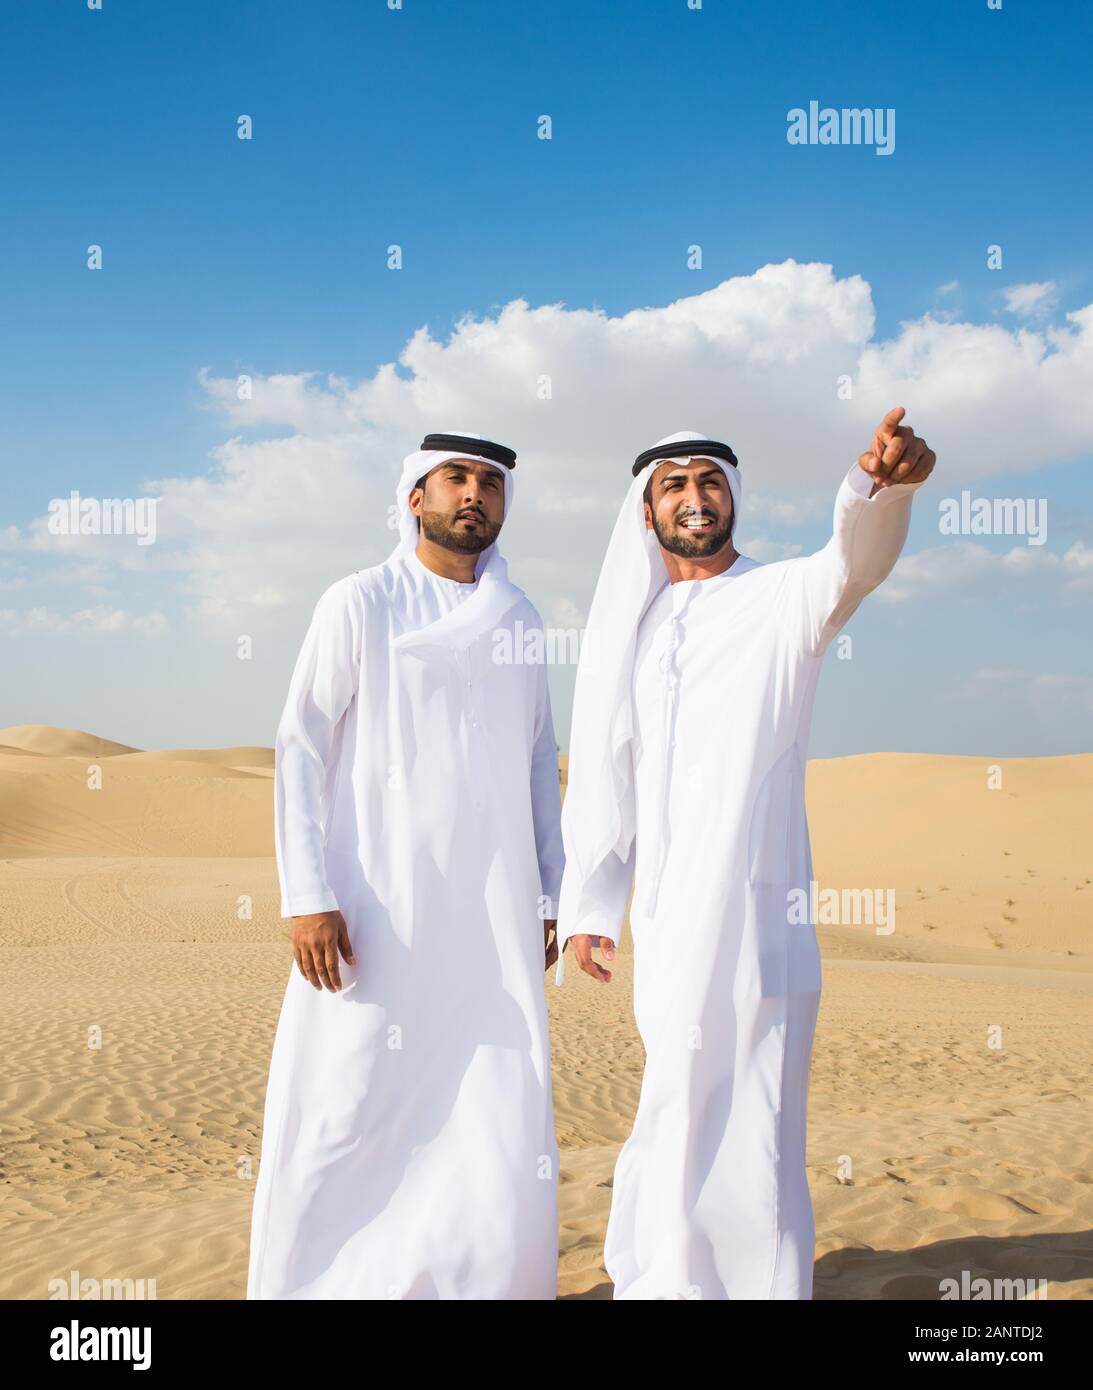 Arabian men witk kandora walking in the desert - Portrait of two middle  eastern adults with traditional arabic dress Stock Photo - Alamy